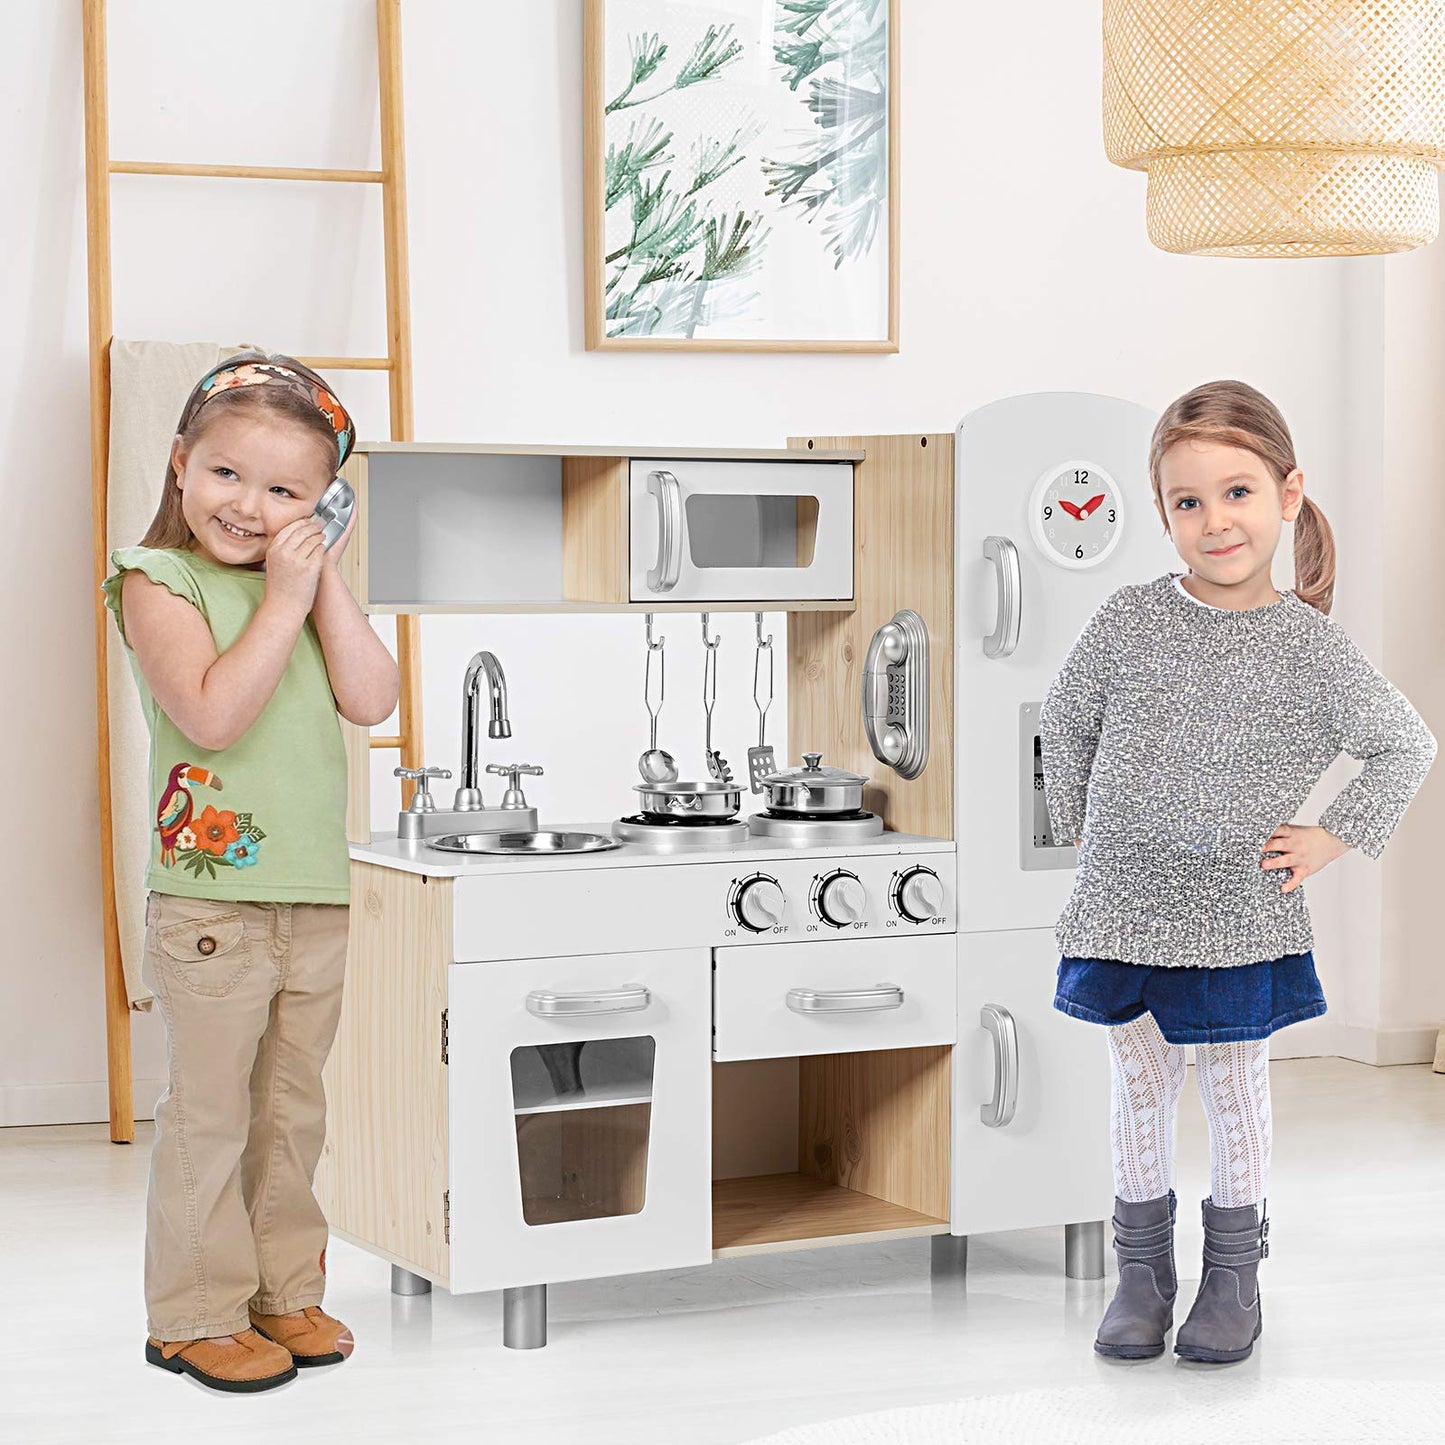 Costzon Kitchen Playset for Kids, Wooden Pretend Cooking Kitchen w/Utensils, Oven, Cabinets, Faucet, Sink & Telephone, Toddlers Play Kitchen Set with Accessories Gift for Age 3+ (Natural)